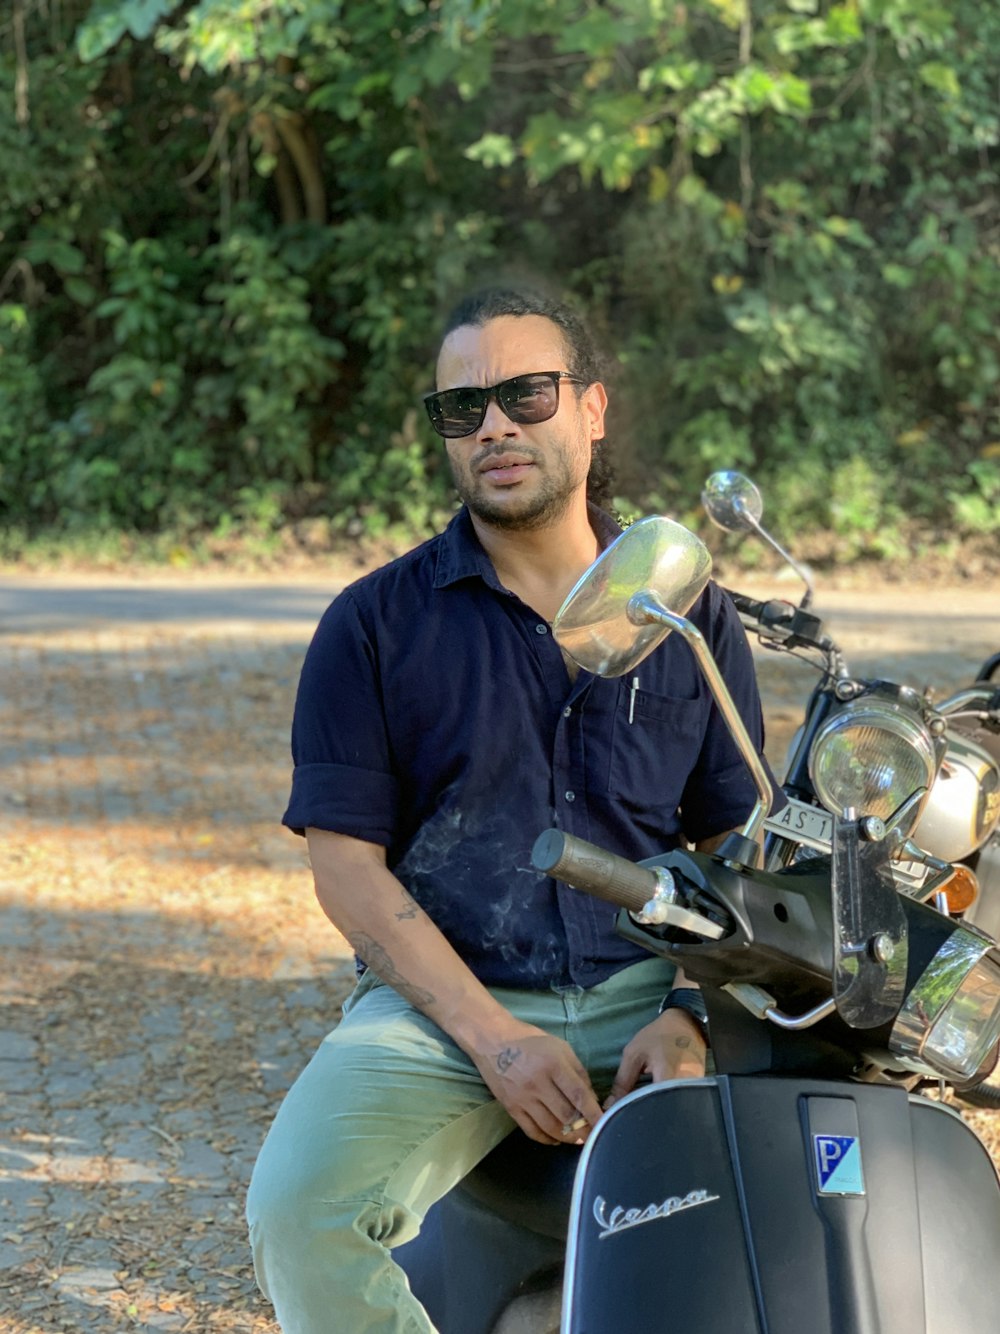 man in blue dress shirt and green shorts sitting on motorcycle